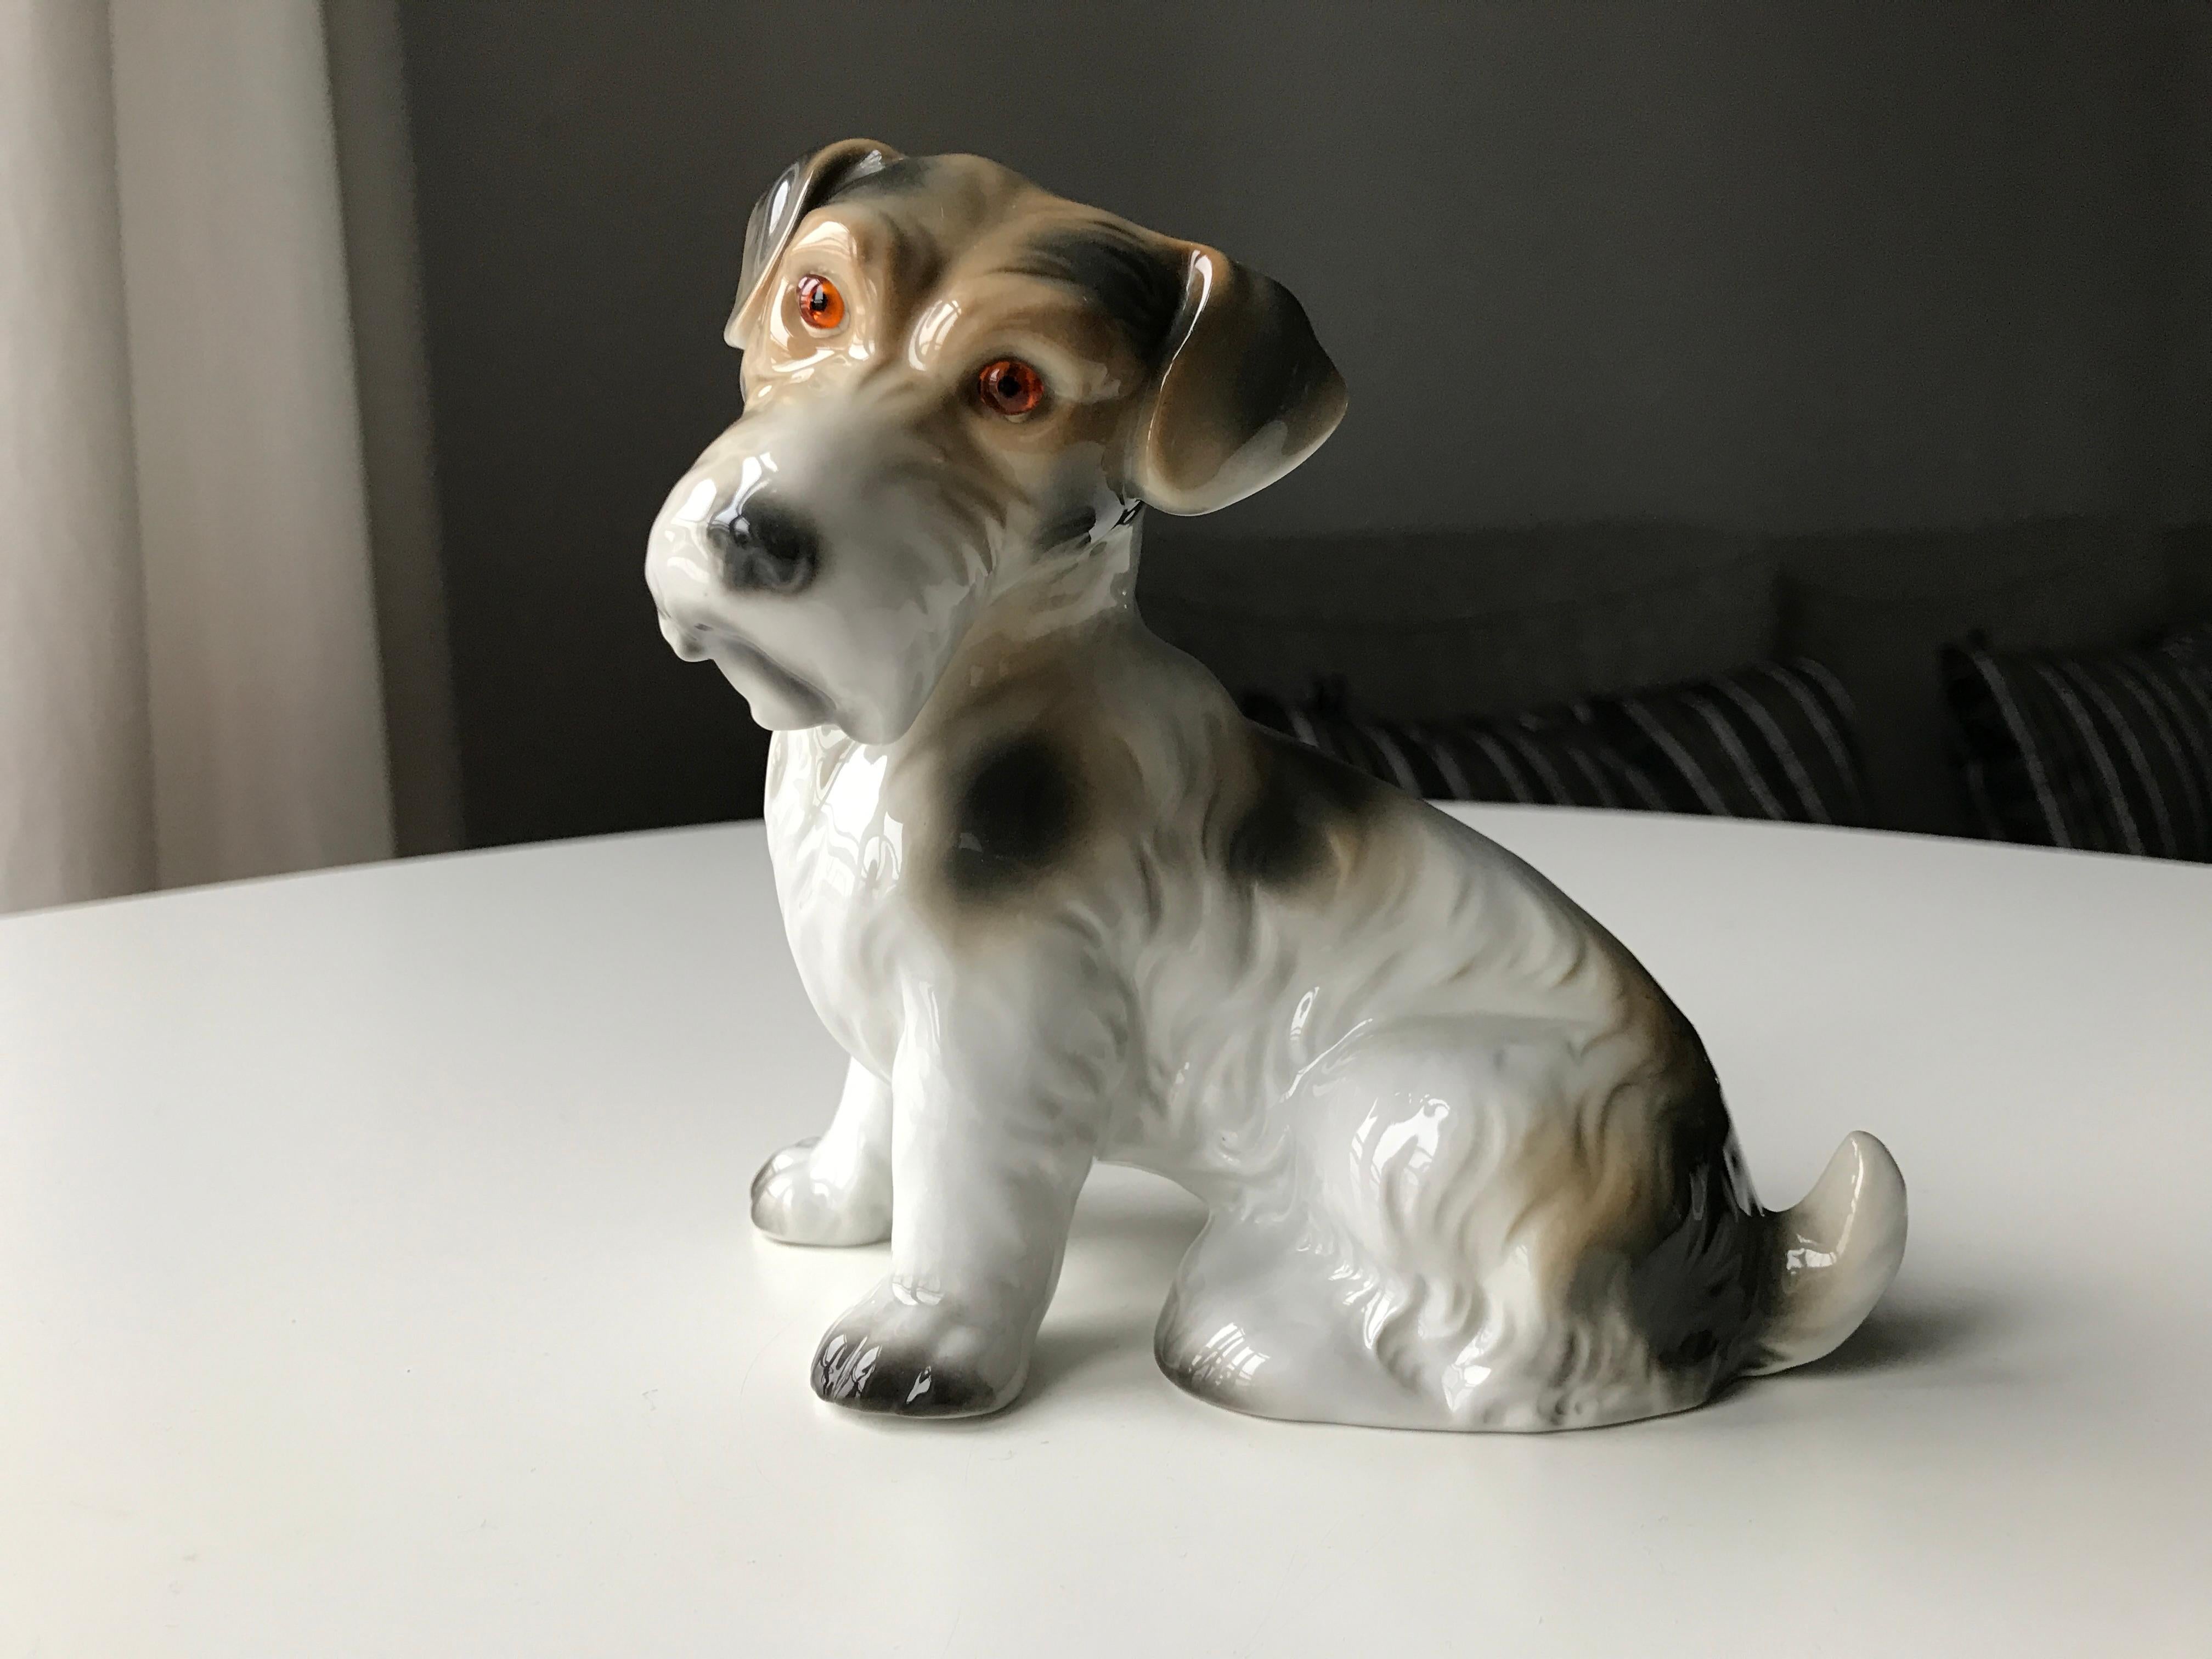 Dog Figurine Ozon/Perfume Lamp Early 20th Century Table Lamp by Fog and Mørup In Good Condition For Sale In Copenhagen, DK